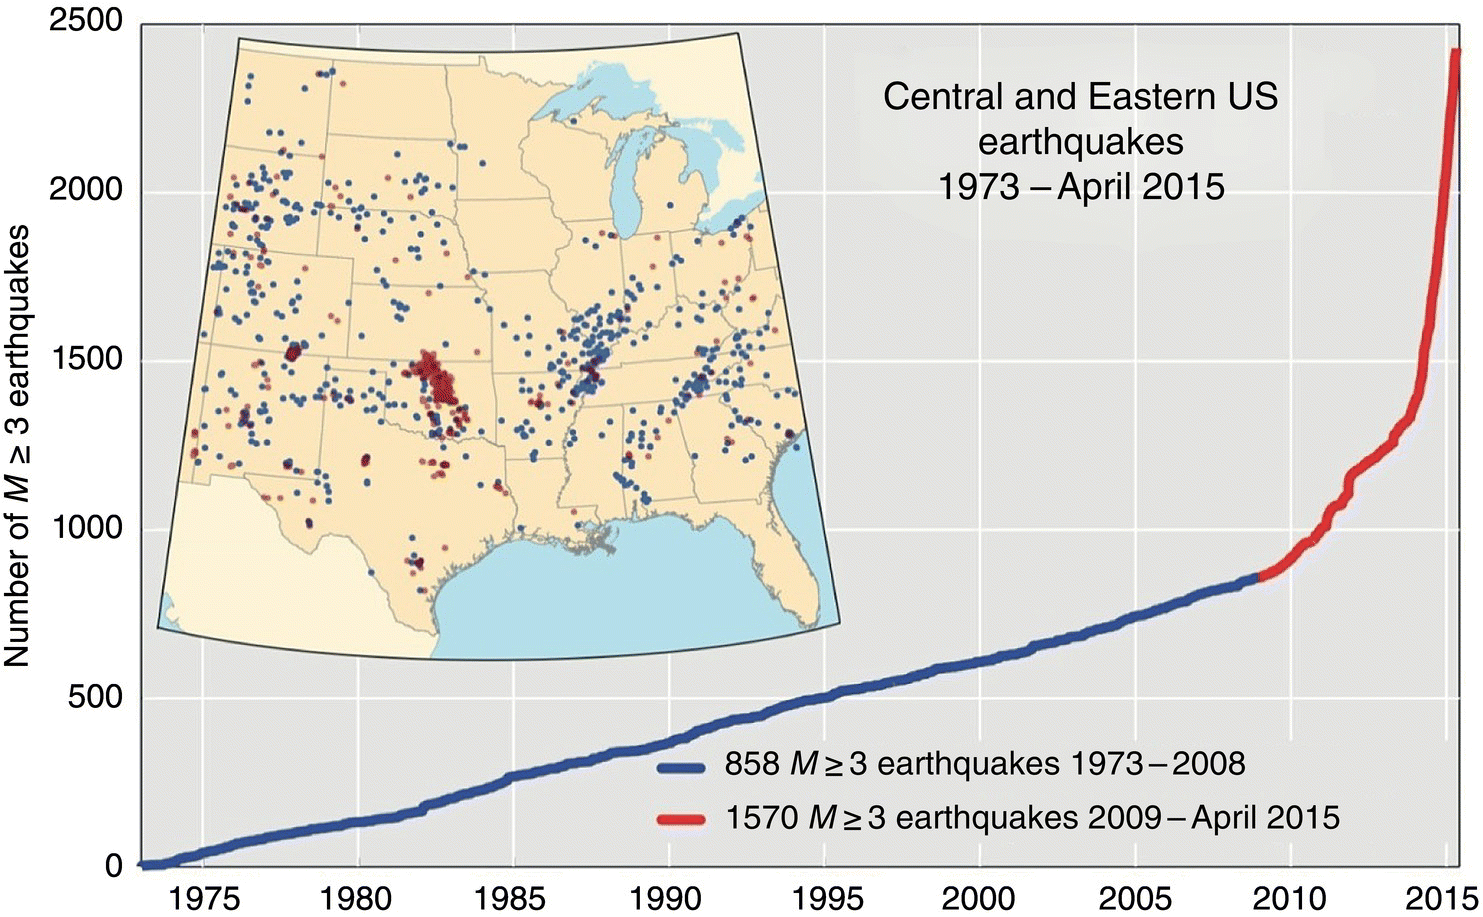 Graph with a curve of a combination of 2 lines representing 858 M≥3 earthquakes 1973–2008 and 1570 M≥3 earthquakes 2009–April 2015. An inset is a map displaying the location of earthquakes in central and eastern U.S.